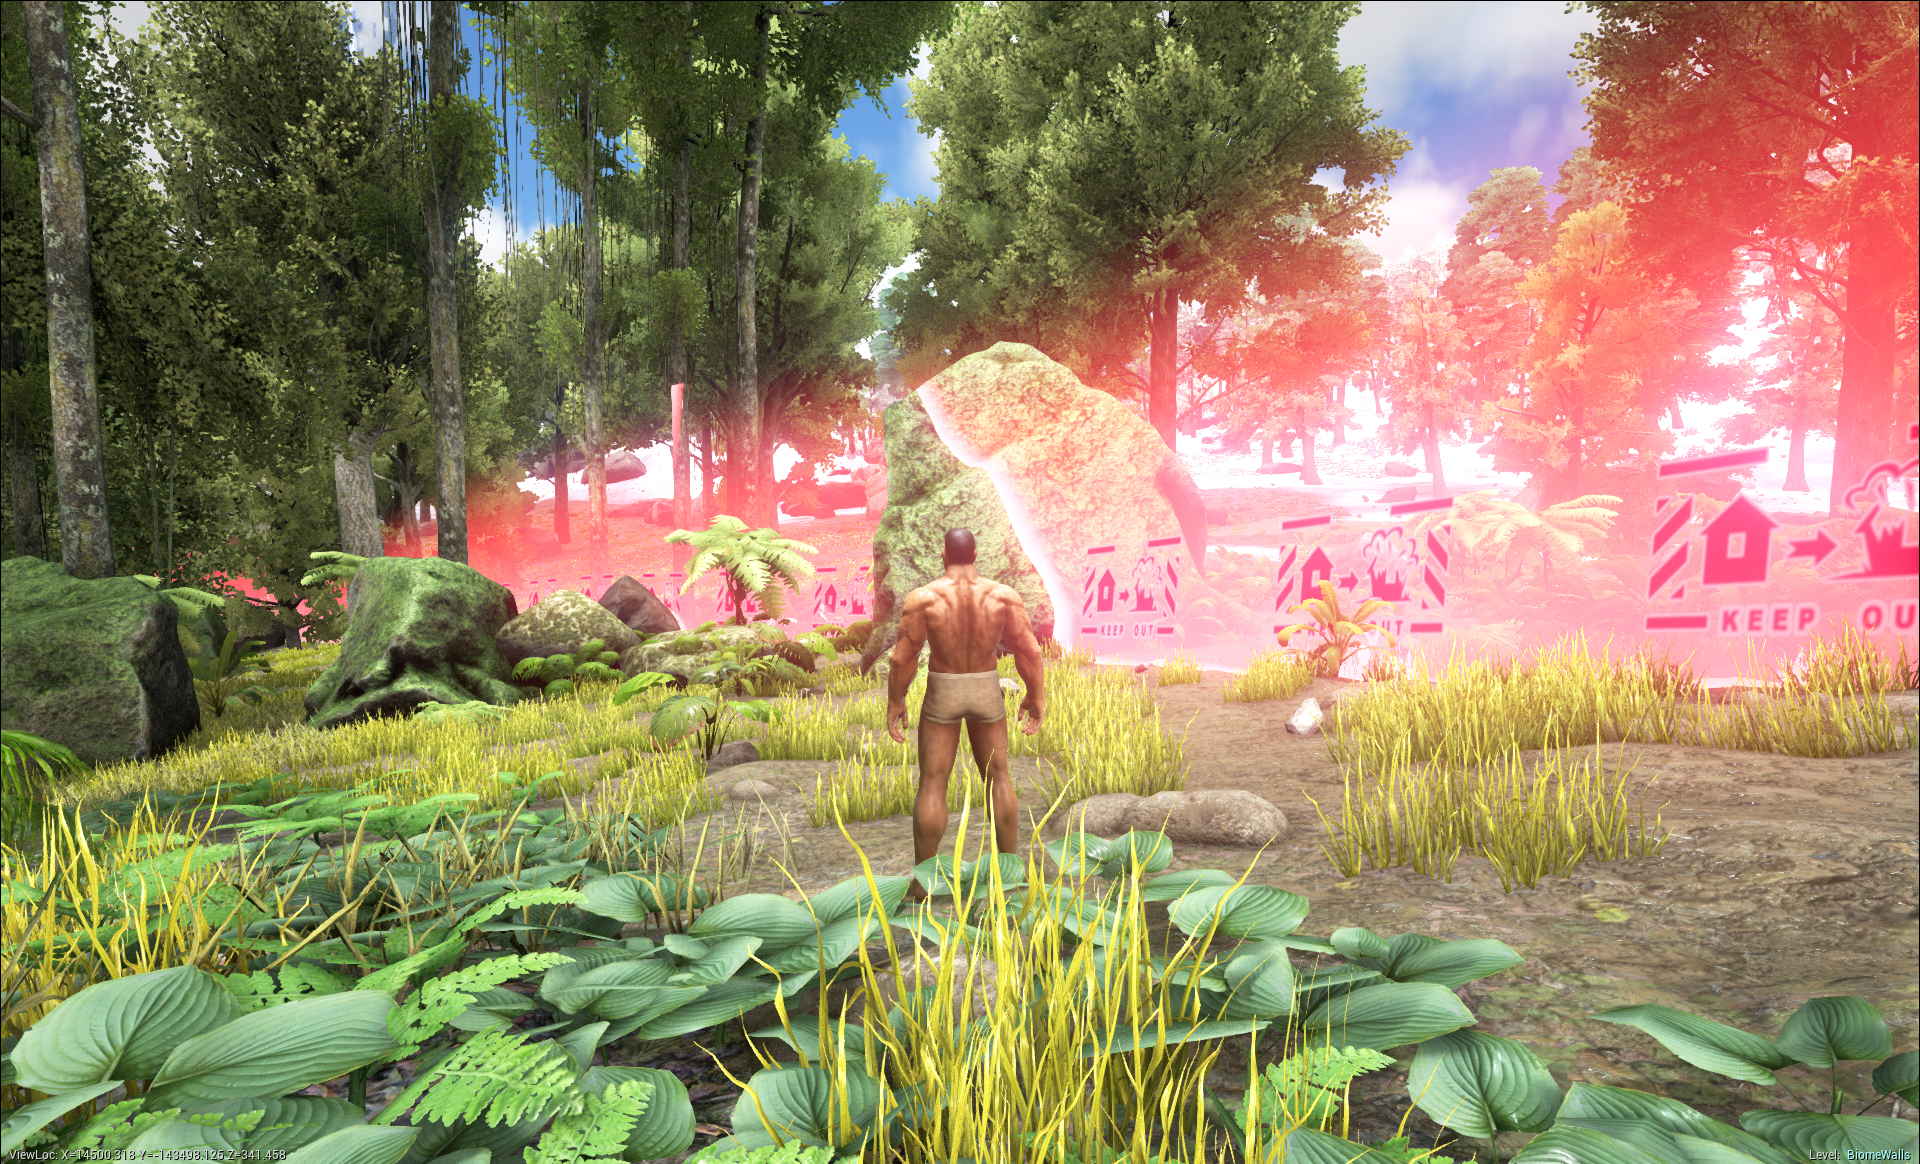 May 23 16 Redwood Biome Update And The Center Boss Challenge Ark Survival Evolved Jat Redwood Biome And Snow Biome Update Hey Survivors Earlier This Month In A Community Crunch We Announced That Later On We Would Be Making Some